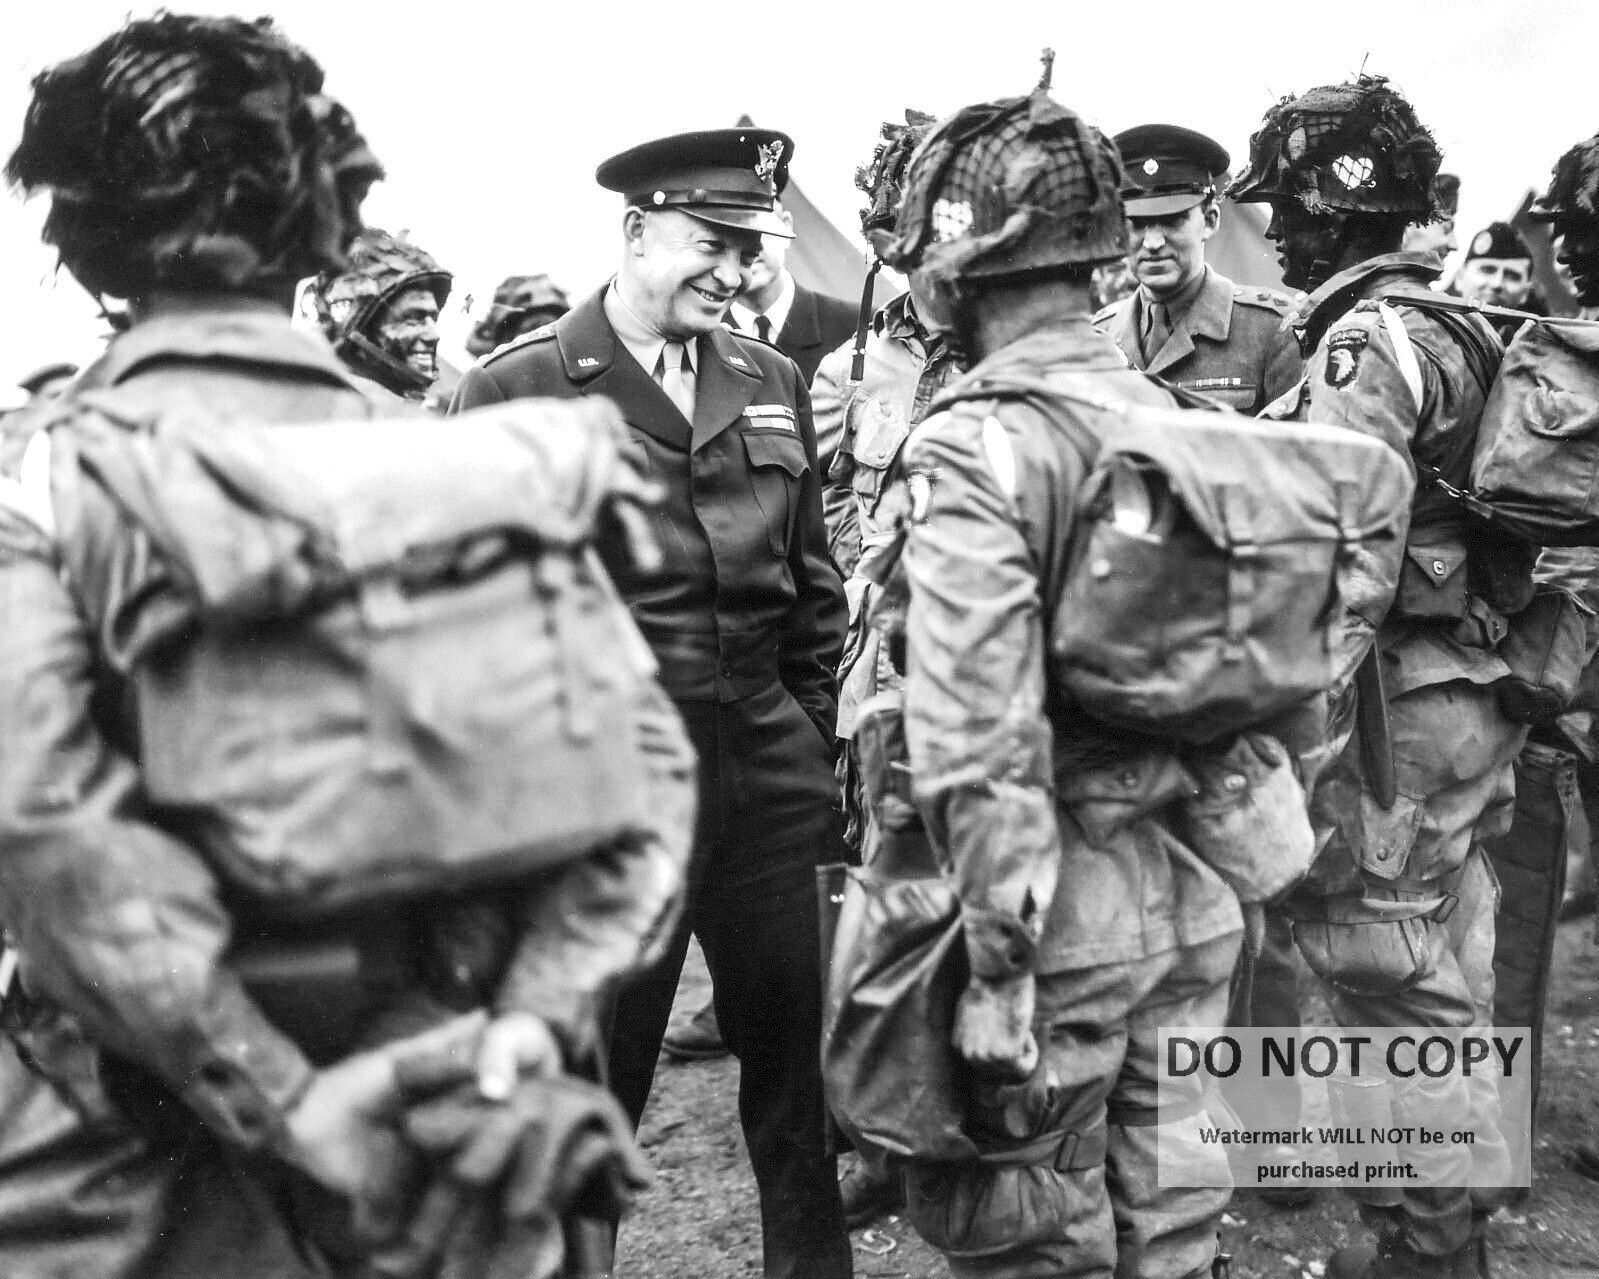 GENERAL DWIGHT EISENHOWER SPEAKS w/ PARATROOPERS BEFORE D-DAY 8X10 PHOTO (CC837)